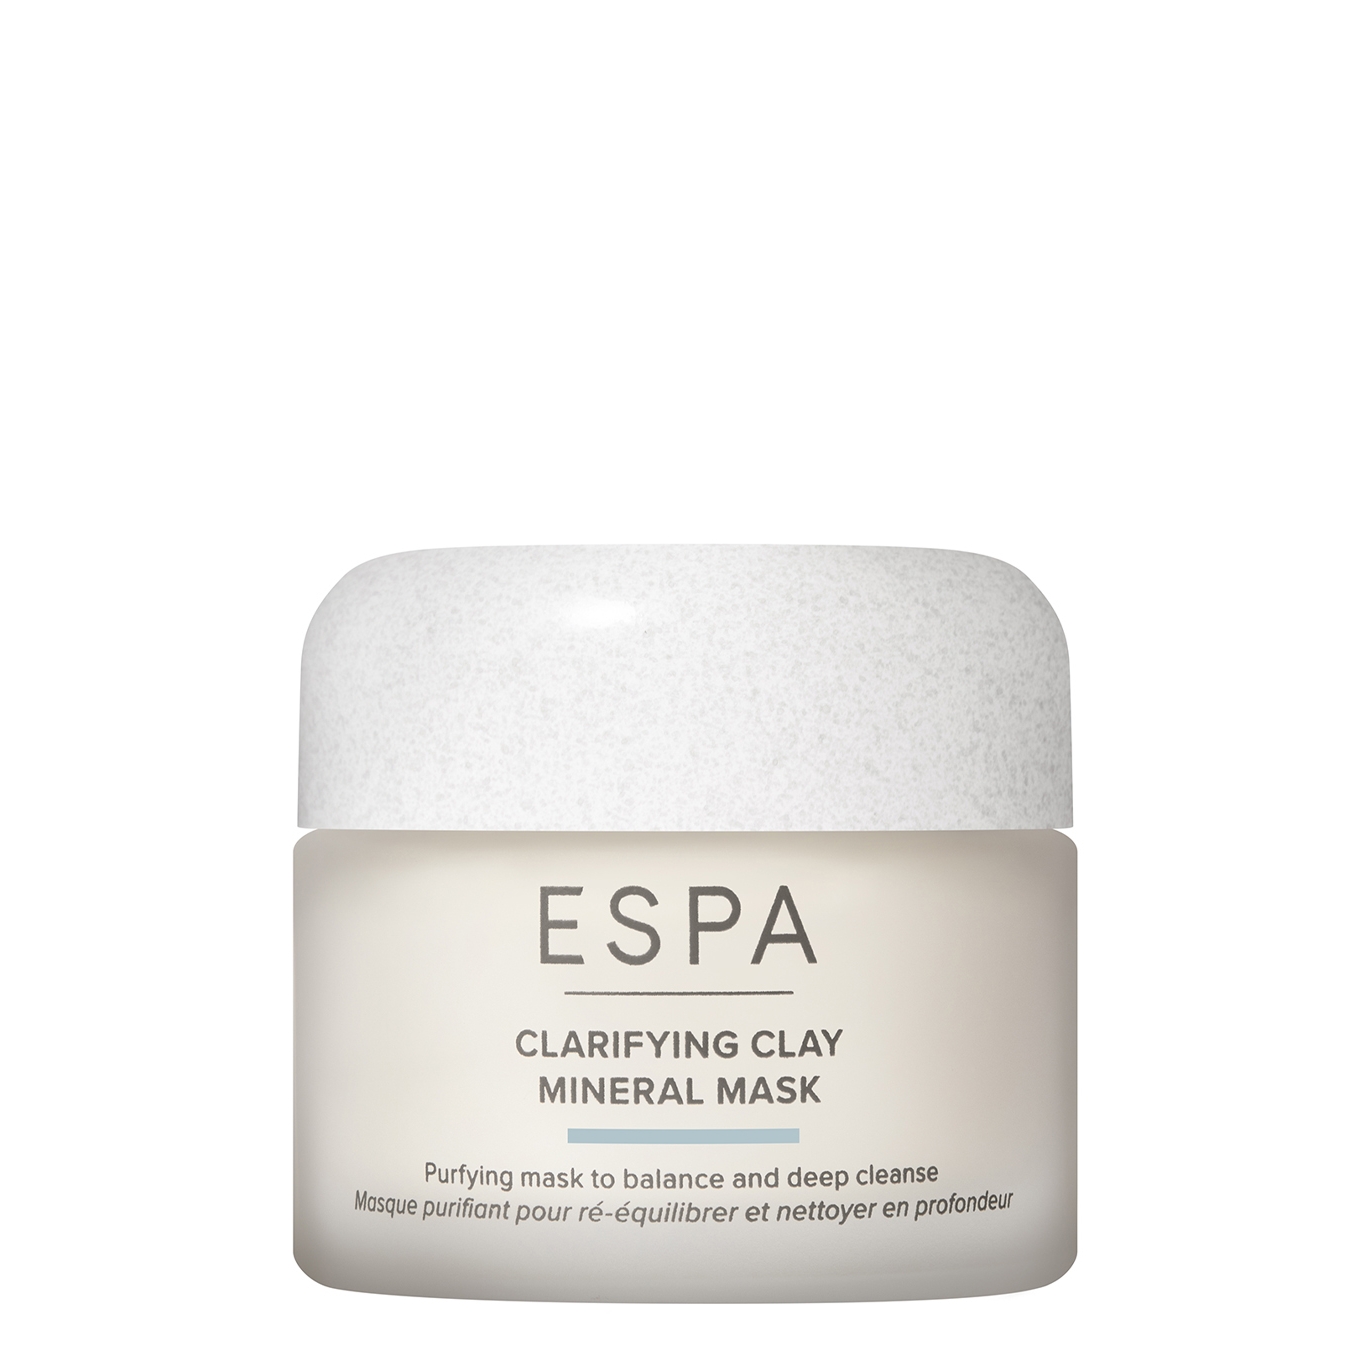 Espa Clarifying Clay Mineral Mask 55ml, Mineral Mask, Hydrating In White